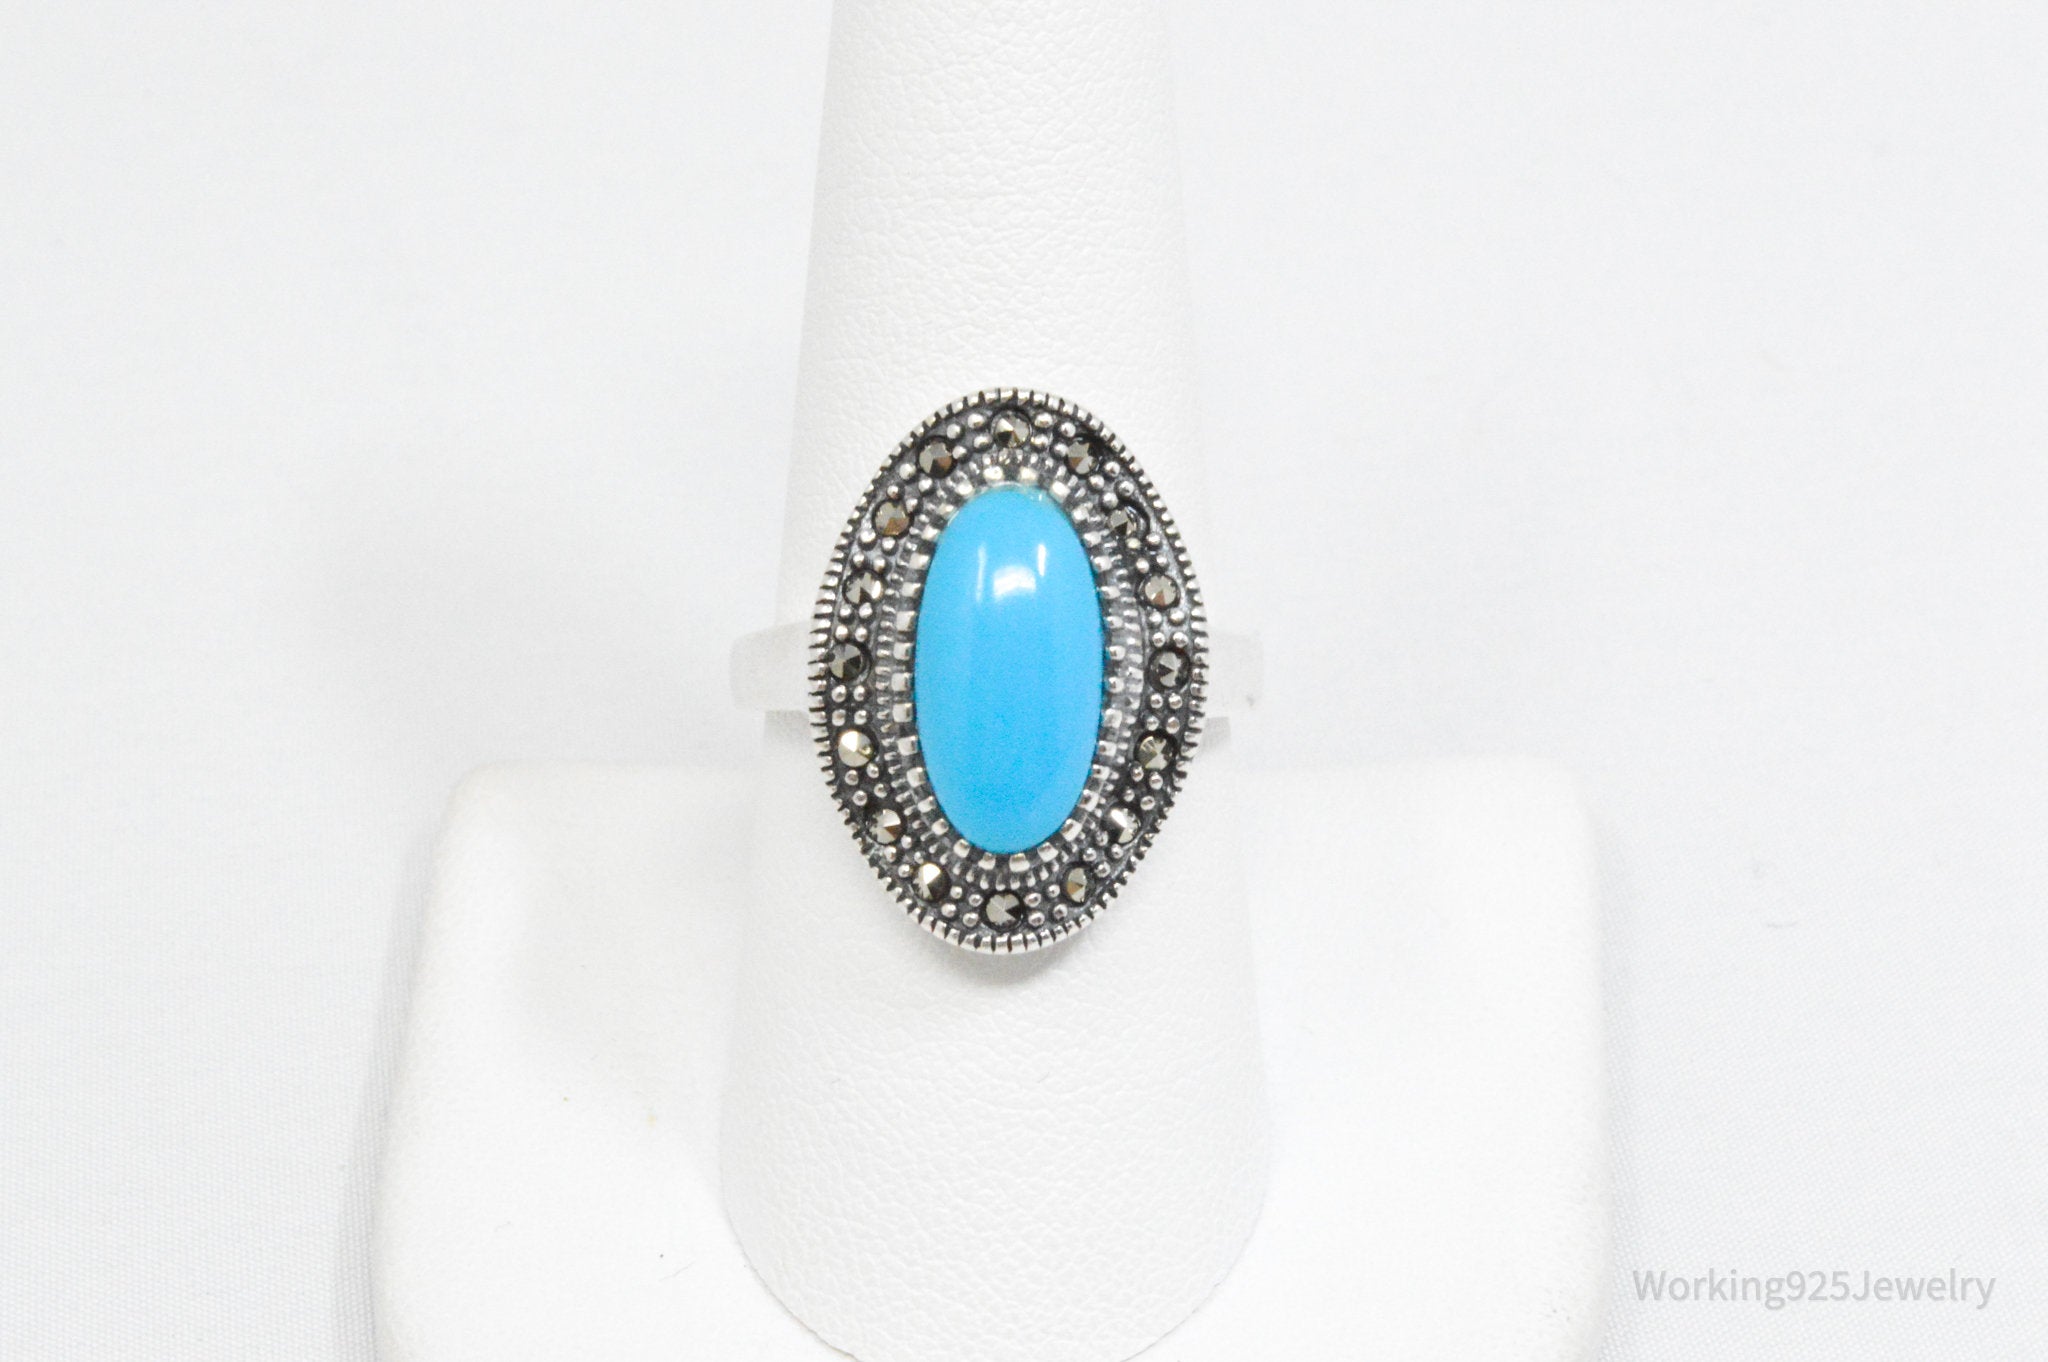 Vintage Art Deco Large Turquoise Marcasite Sterling Silver Ring - Sz 8.5